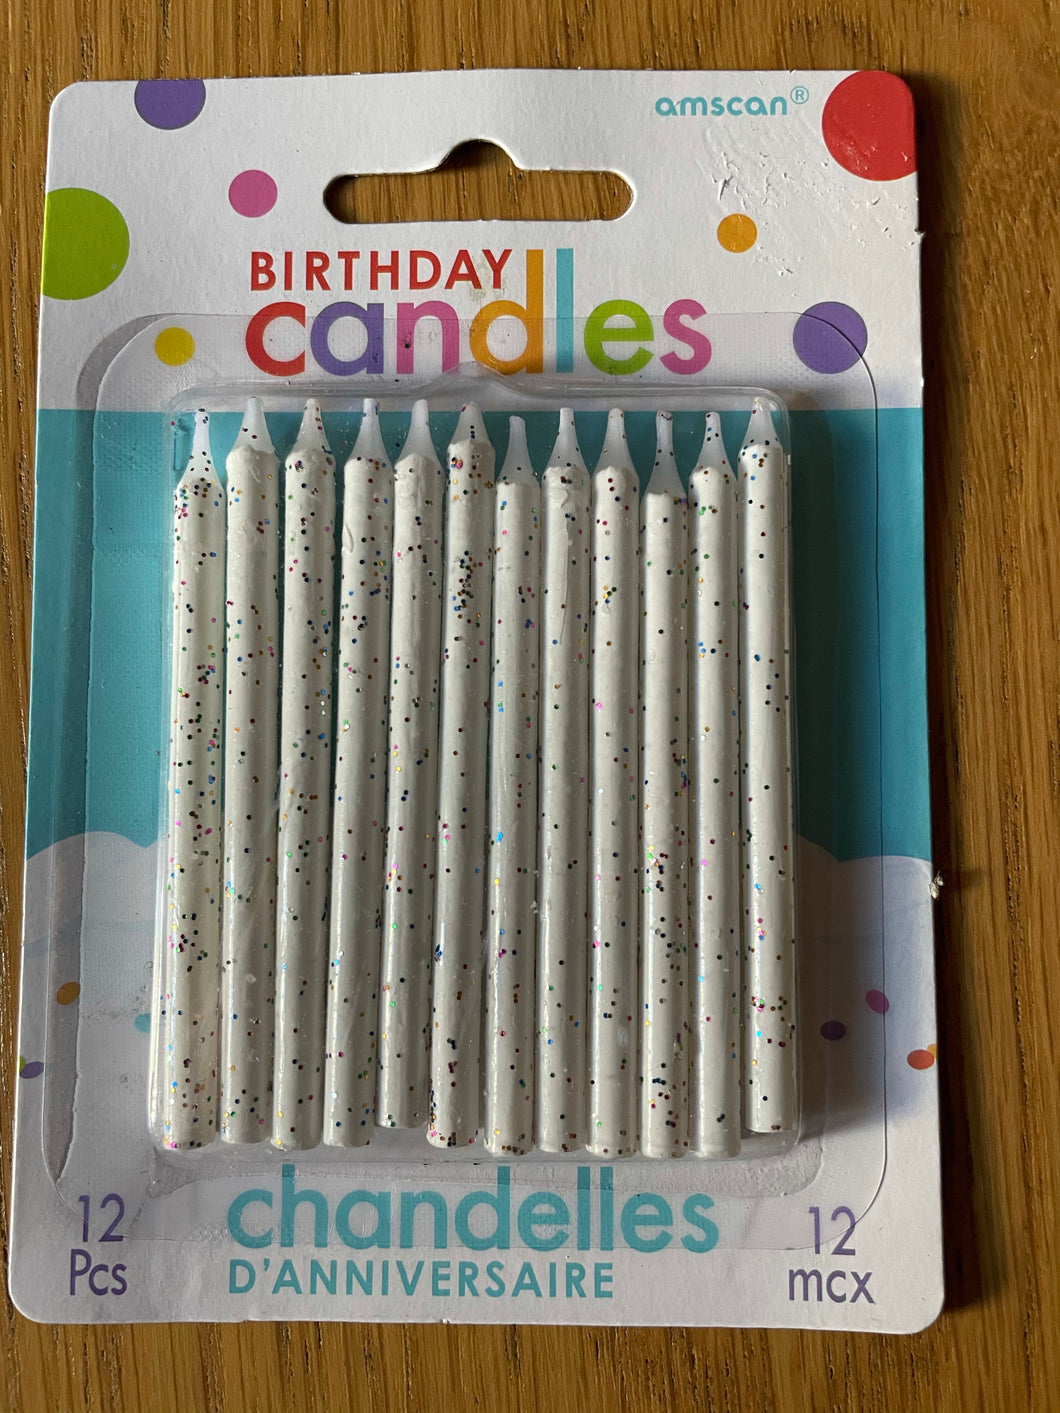 Candles - 10 pack